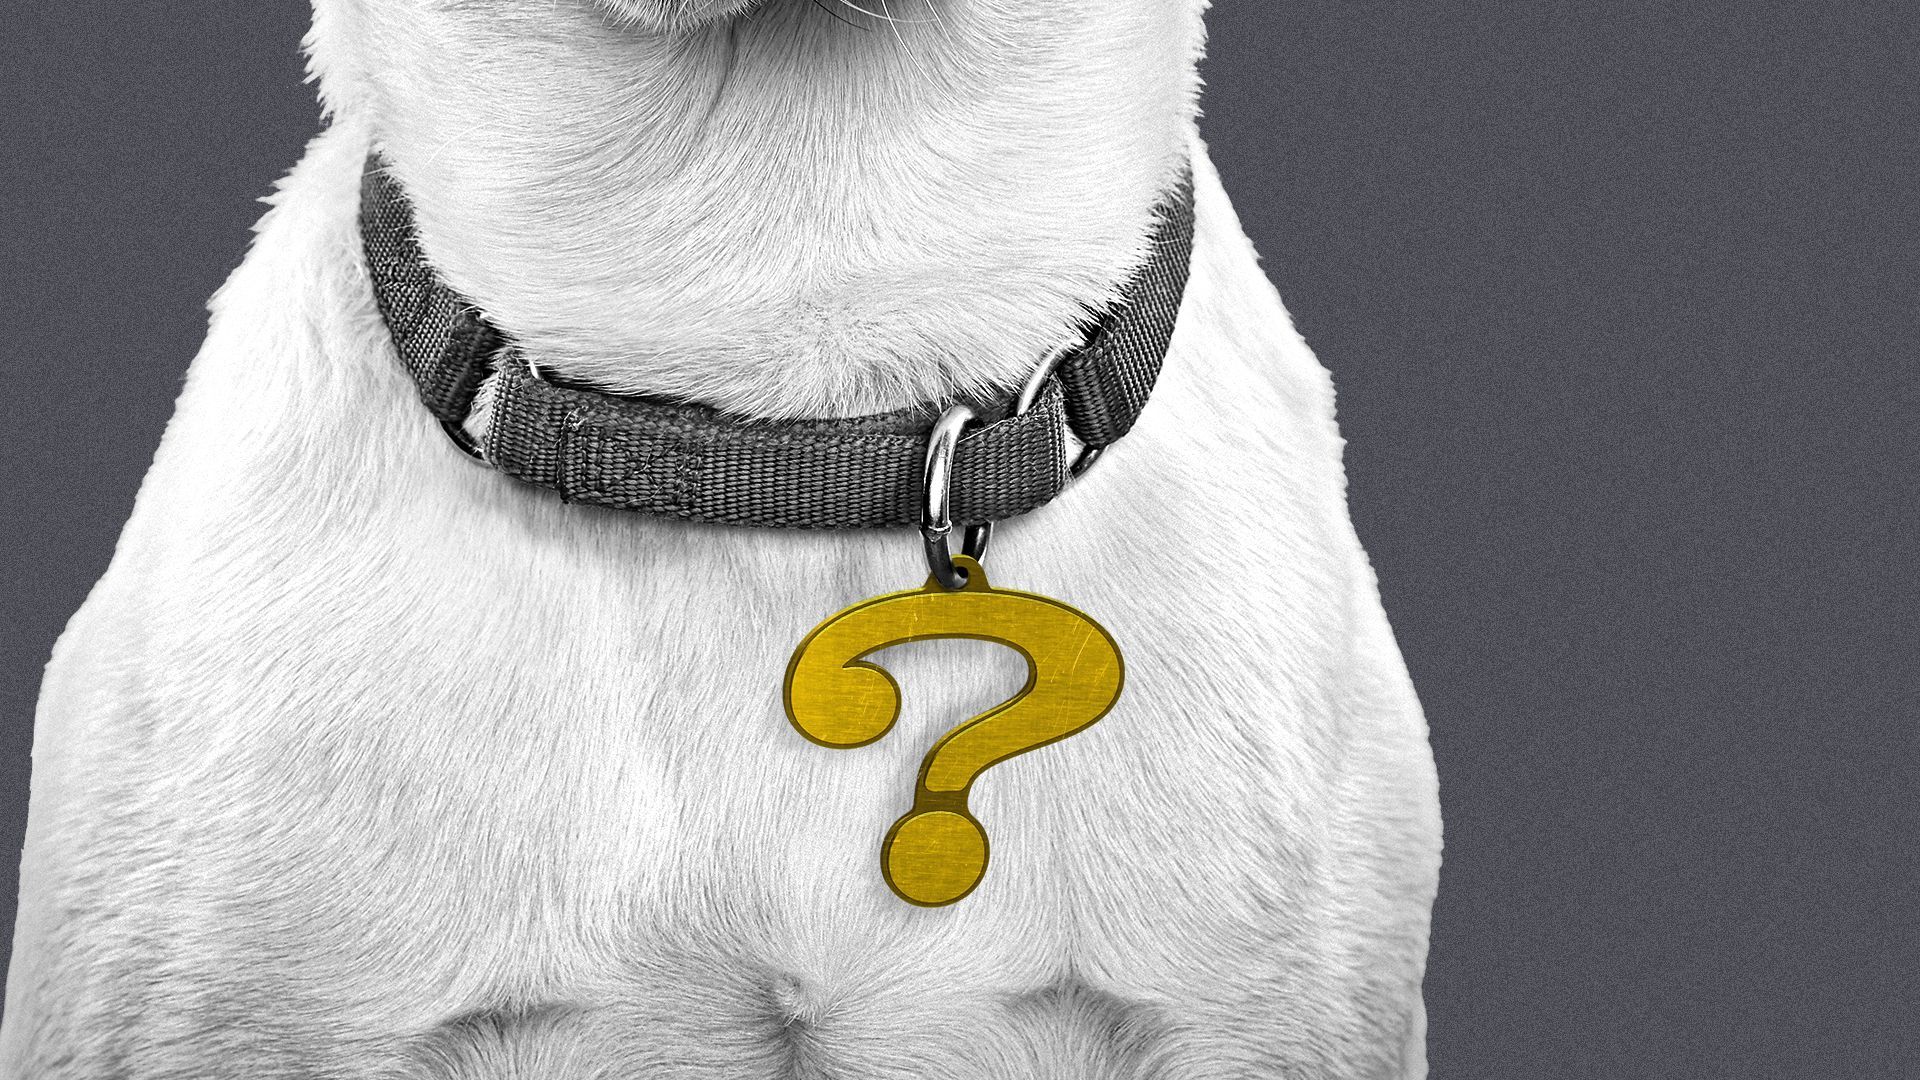 Illustration of a dog wearing a collar with a metal pendant in the shape of a question mark.